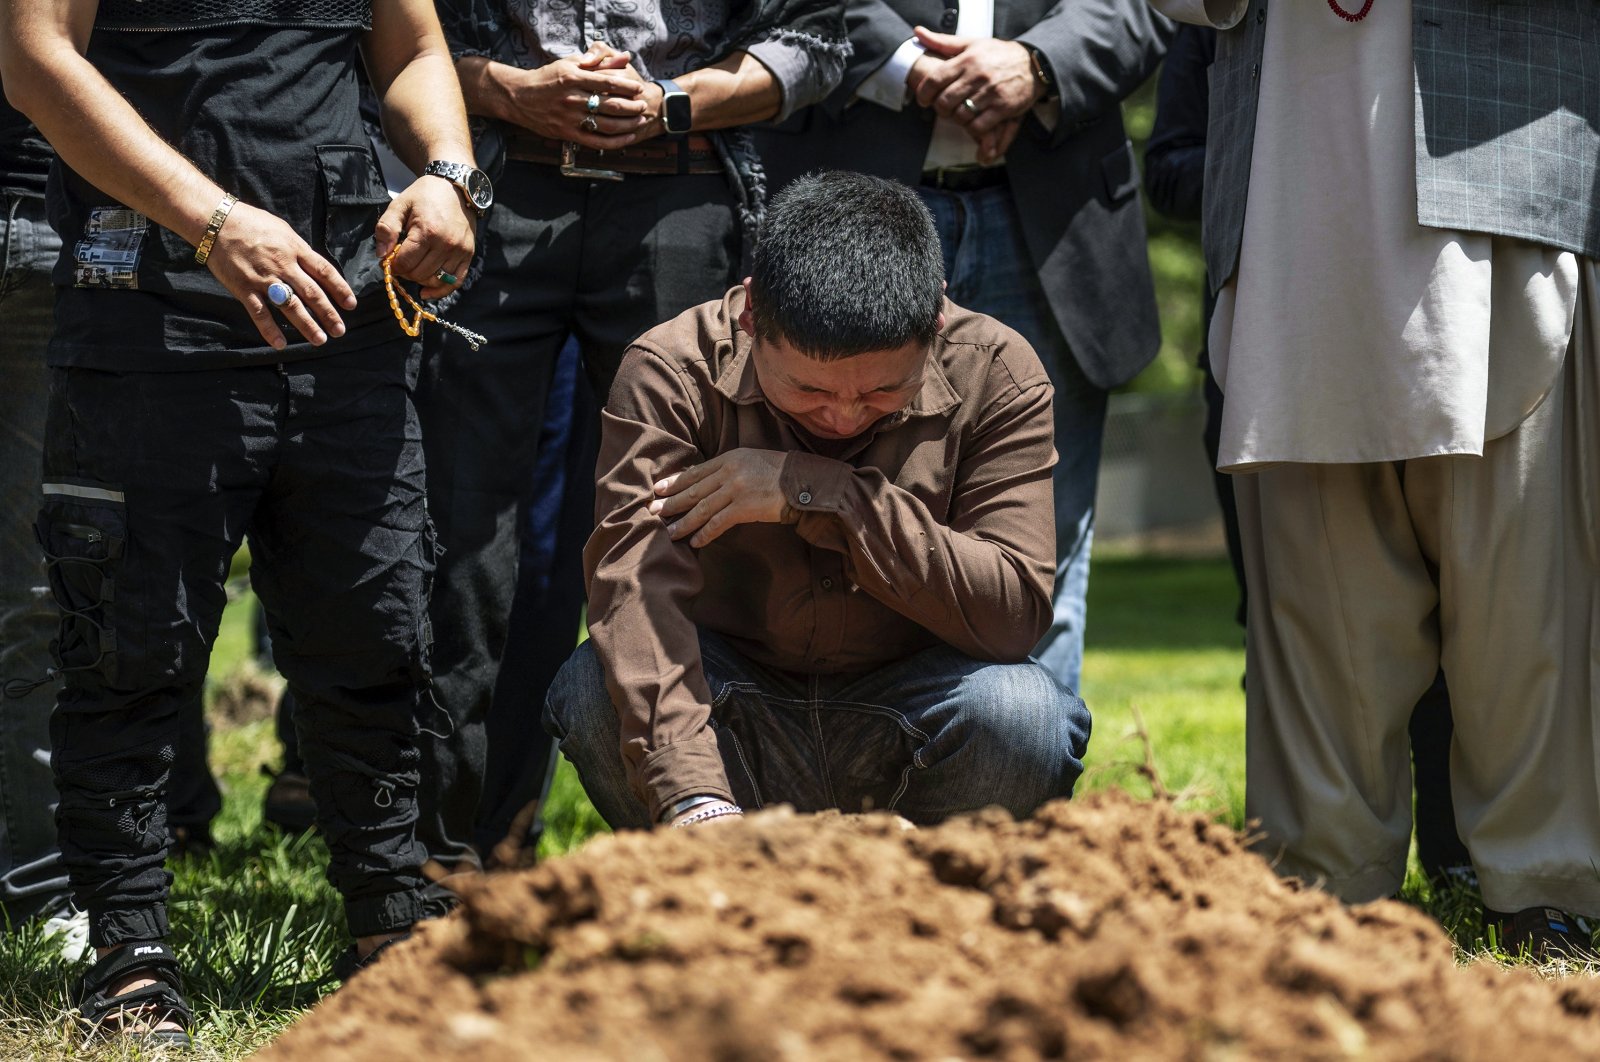 Altaf Hussain cries over the grave of his brother Aftab Hussein at Fairview Memorial Park in Albuquerque, N.M., on Friday, Aug. 5, 2022. (AP Photo)